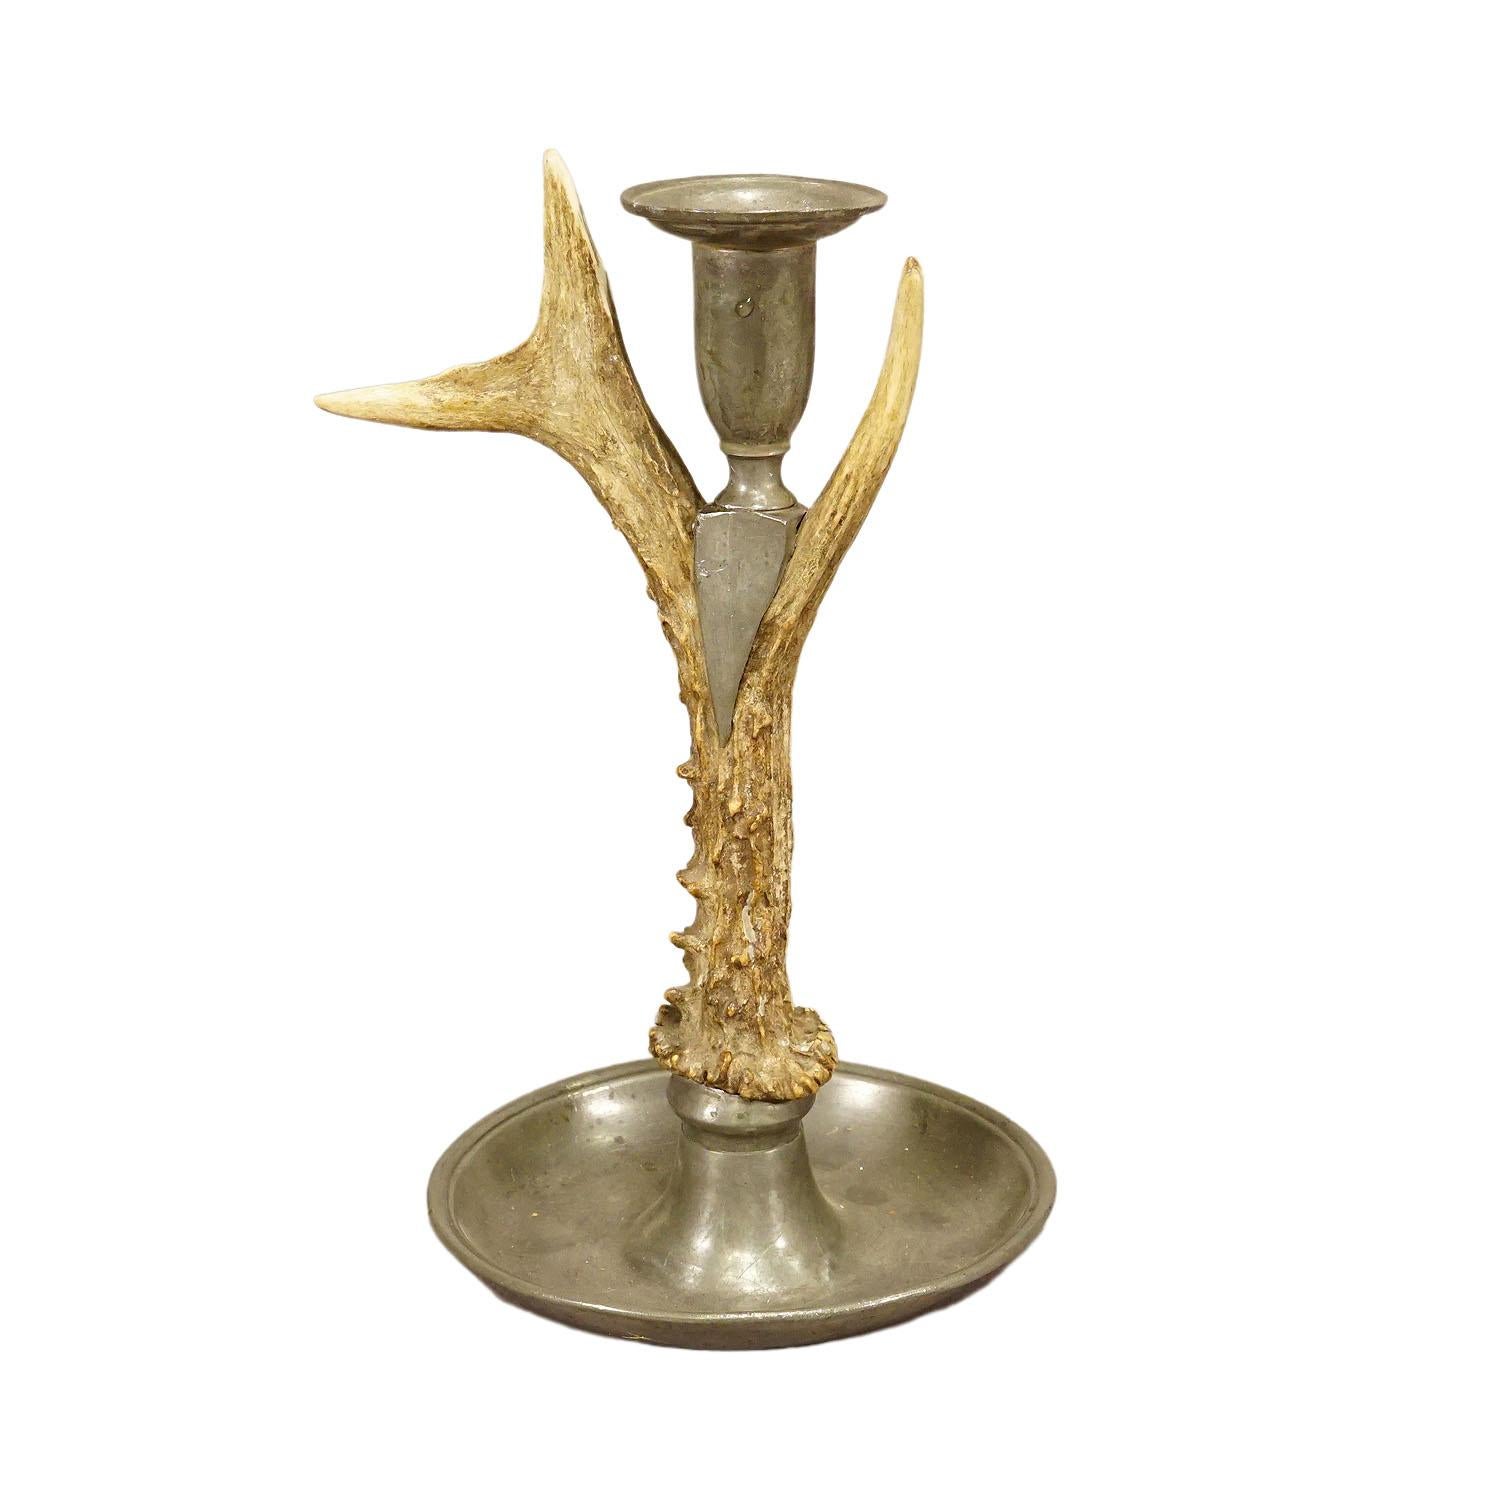 A Black Forest Candle Holder with Pewter Base and Spout, Germany circa 1860s

An antique Black Forest candle holder with pewter base and spout. Made with an original deer antler. Manufactured in South Germany mid 19th century. Excellent